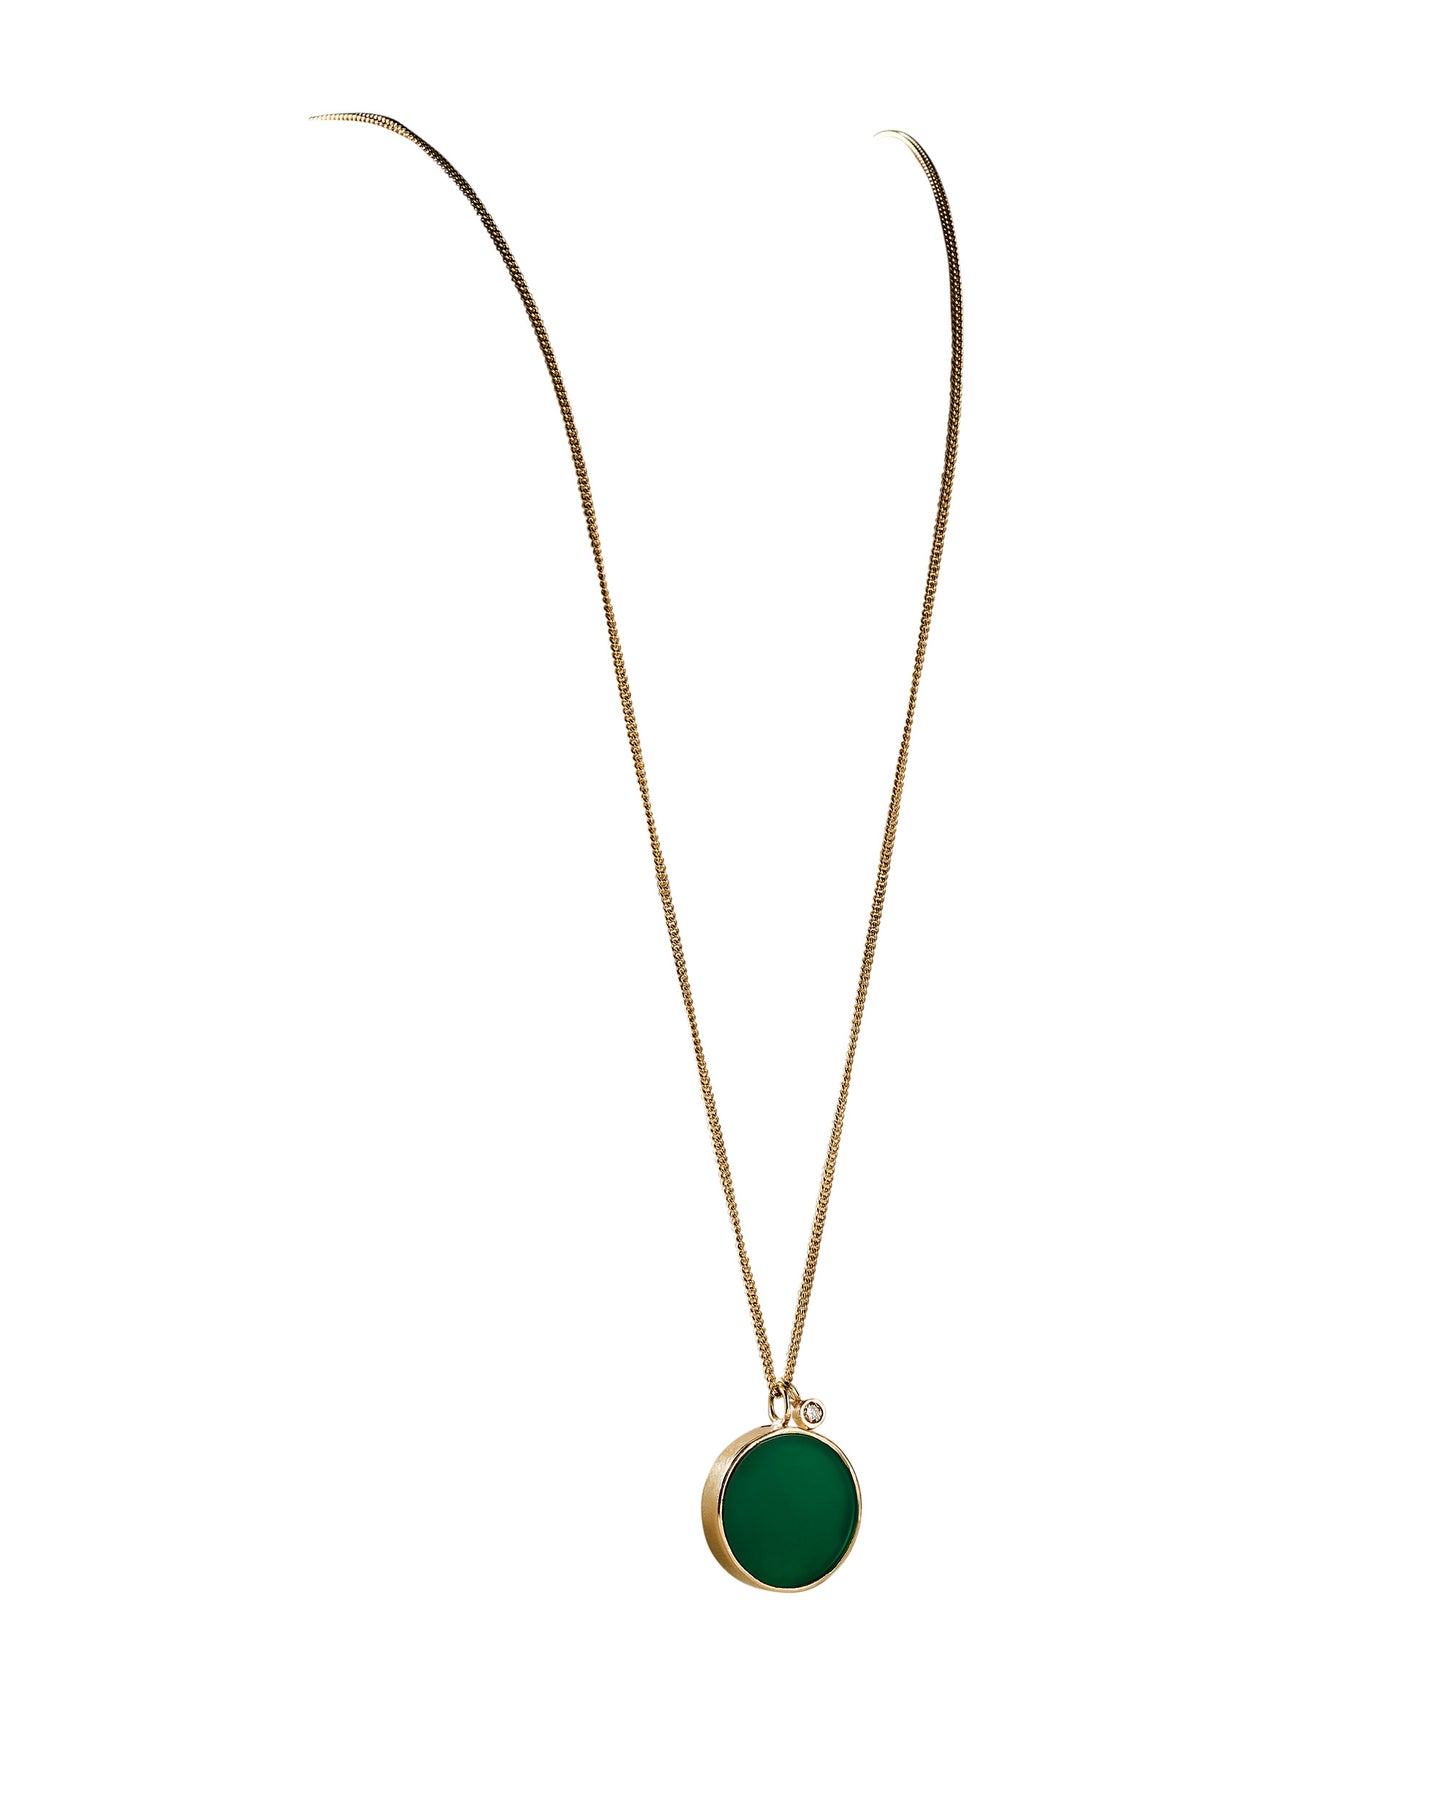 Green and gold pendant necklace with diamond charm full size image